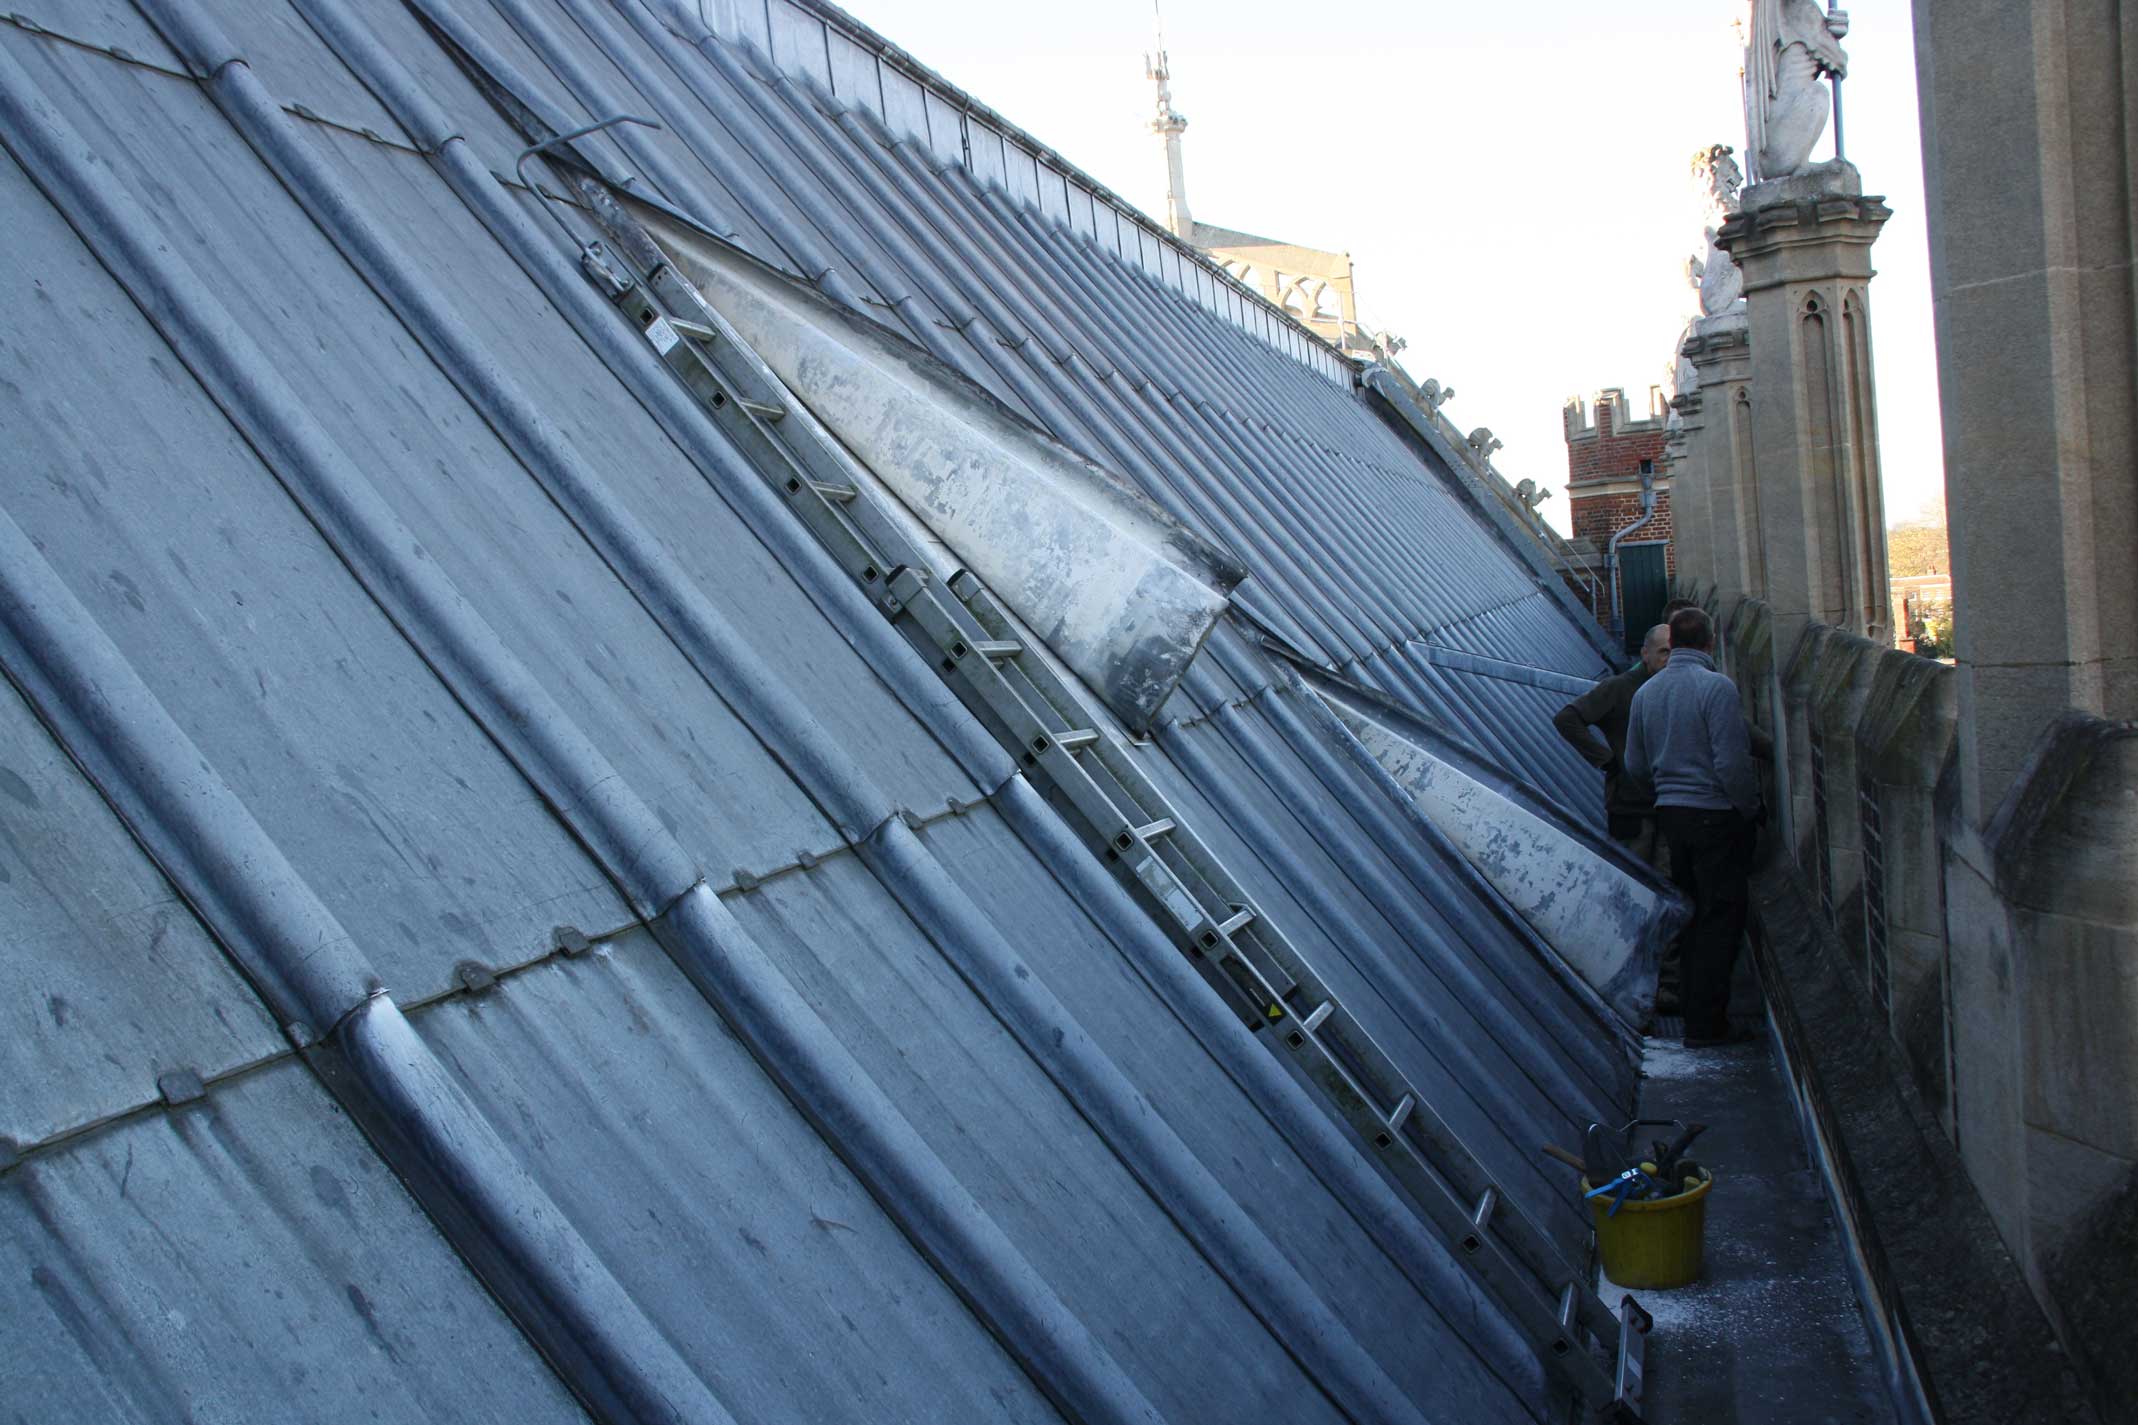 A lead roof being inspected by conservation staff.